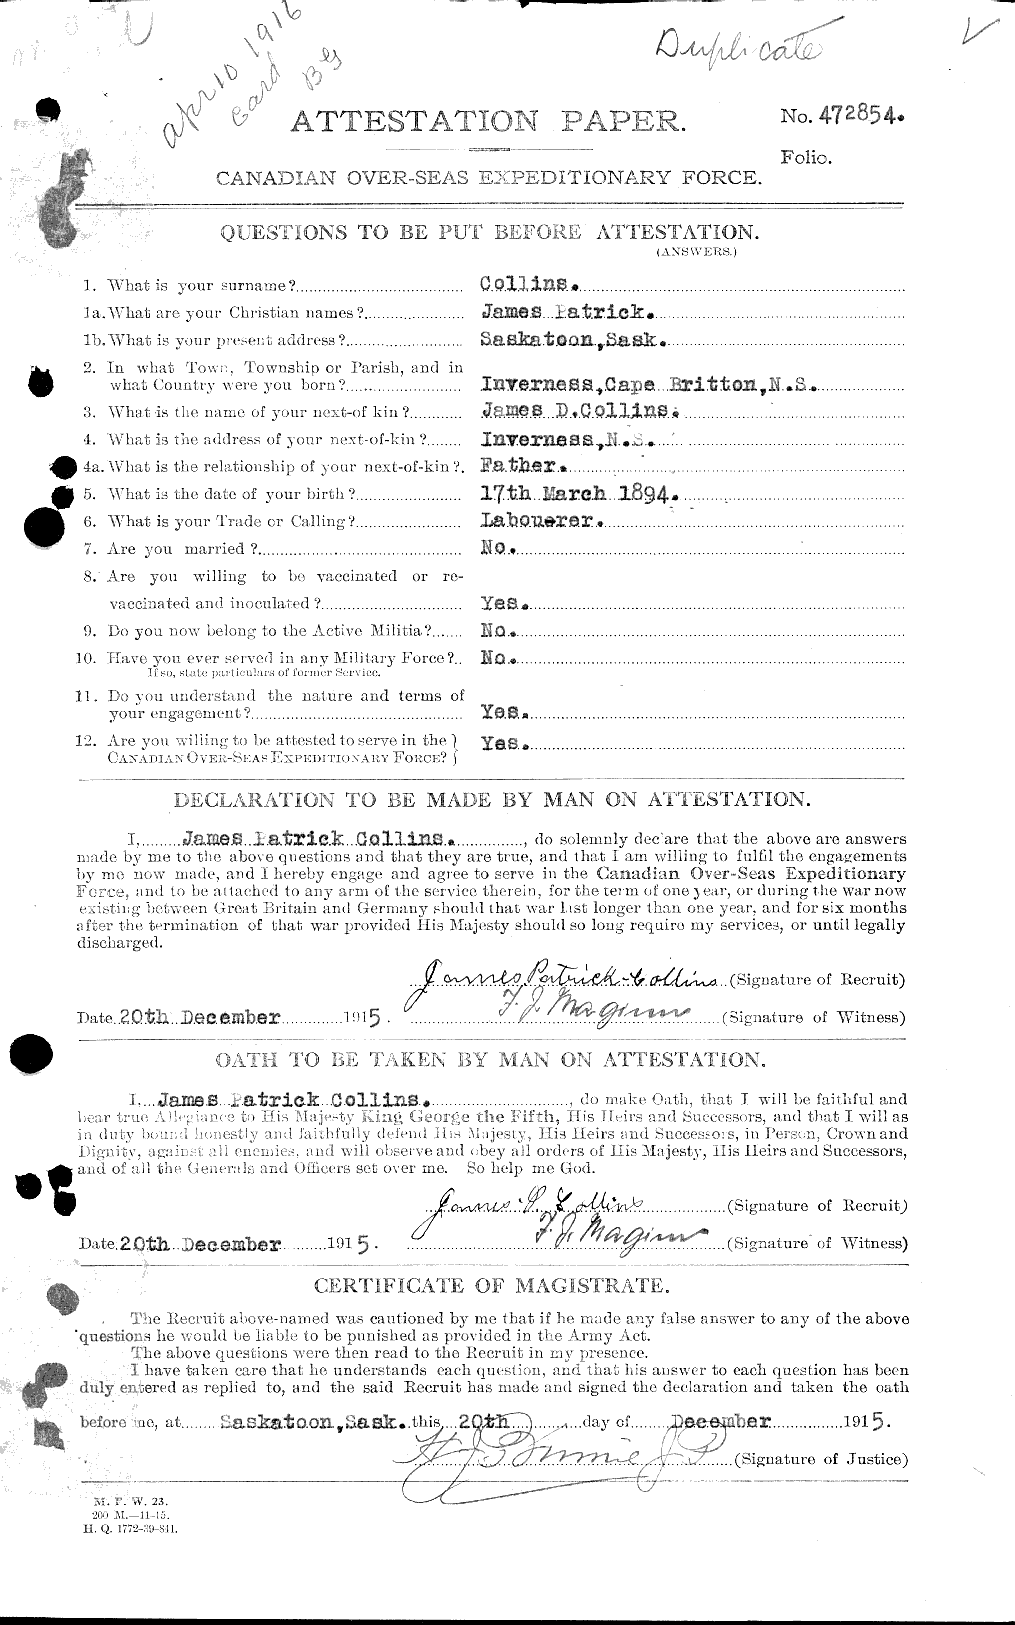 Personnel Records of the First World War - CEF 037945a